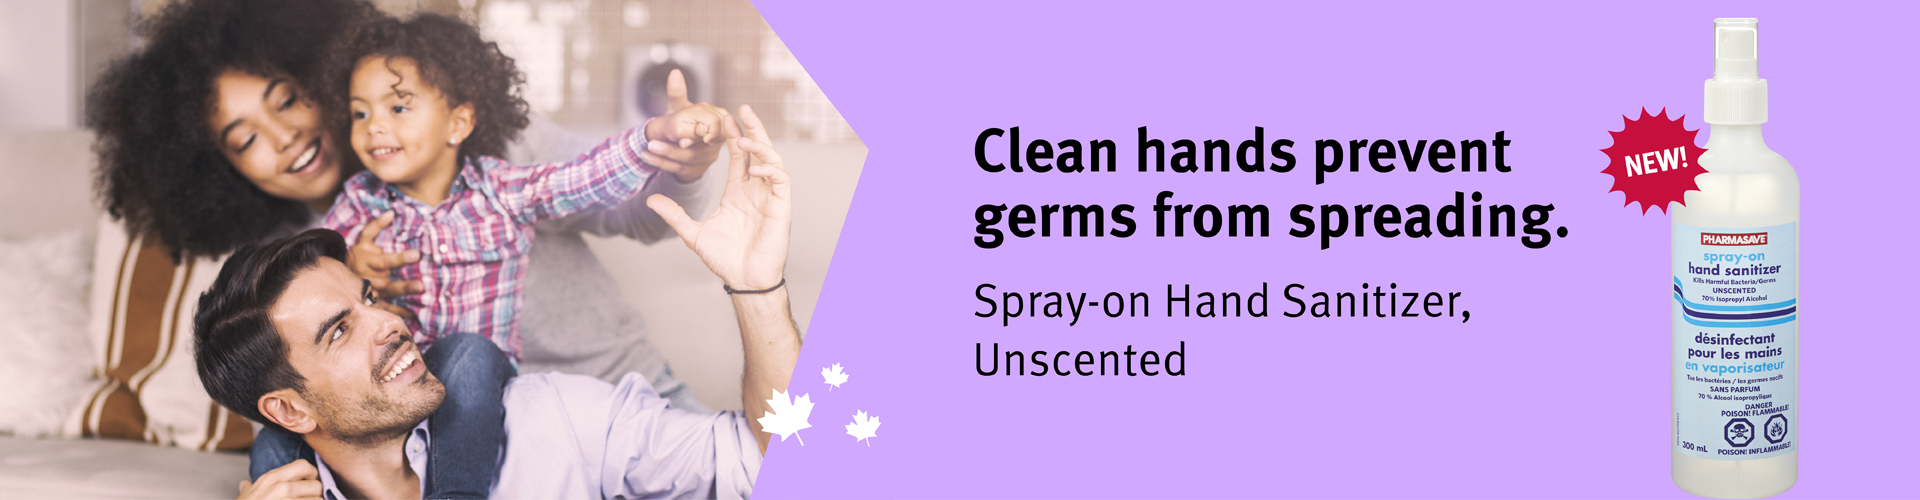 Clean hands prevent germs from spreading. New Pharmasave Brand spray-on Hand Sanitizer, Unscented.